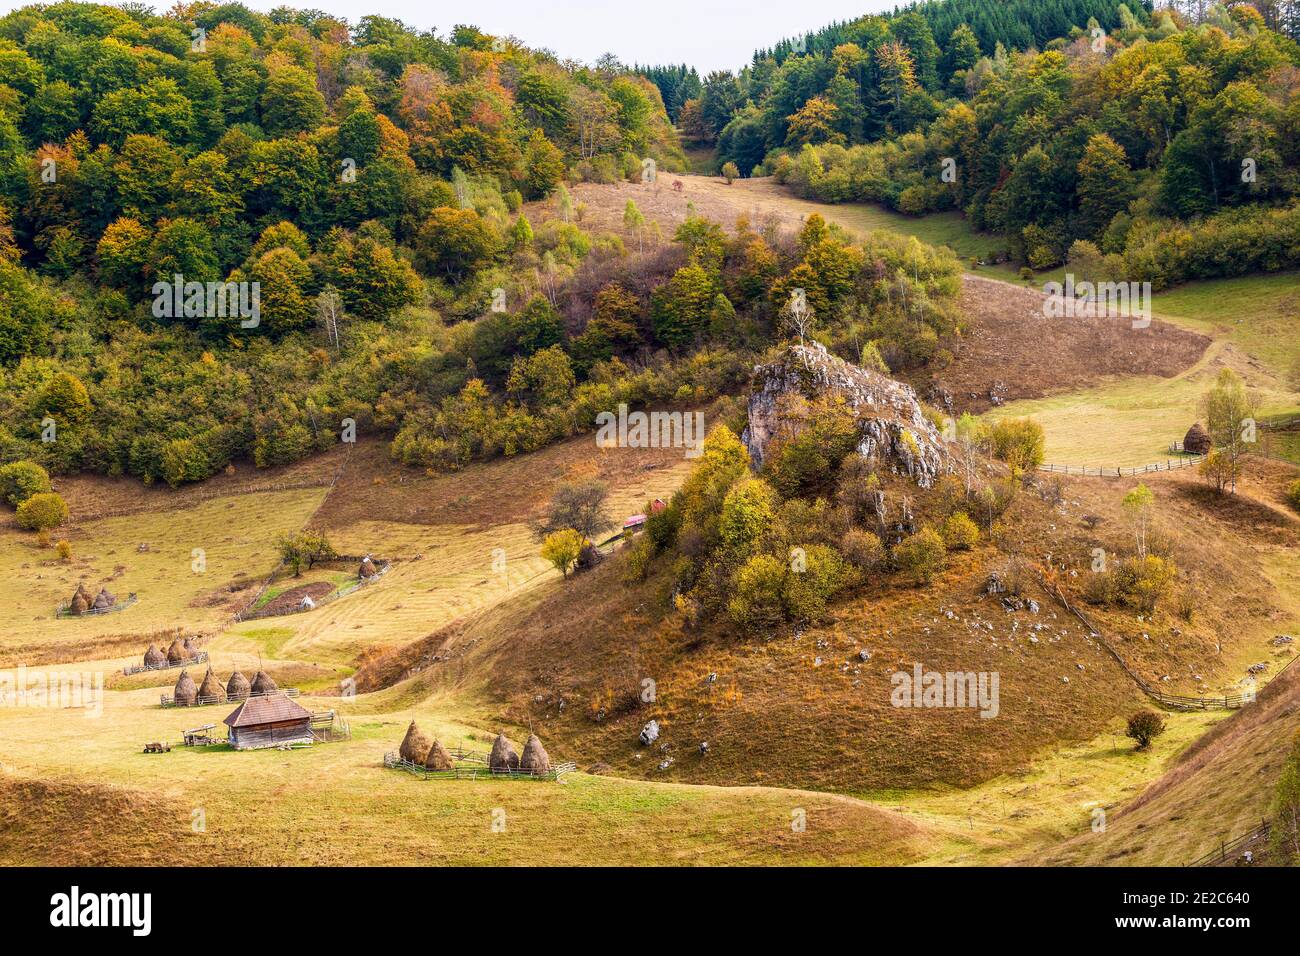 Autumn view of the wolf rock looking down on a small remote mountain village on Fundatura Ponorului. Photo taken on 5th of October 2019 in Fundatura P Stock Photo